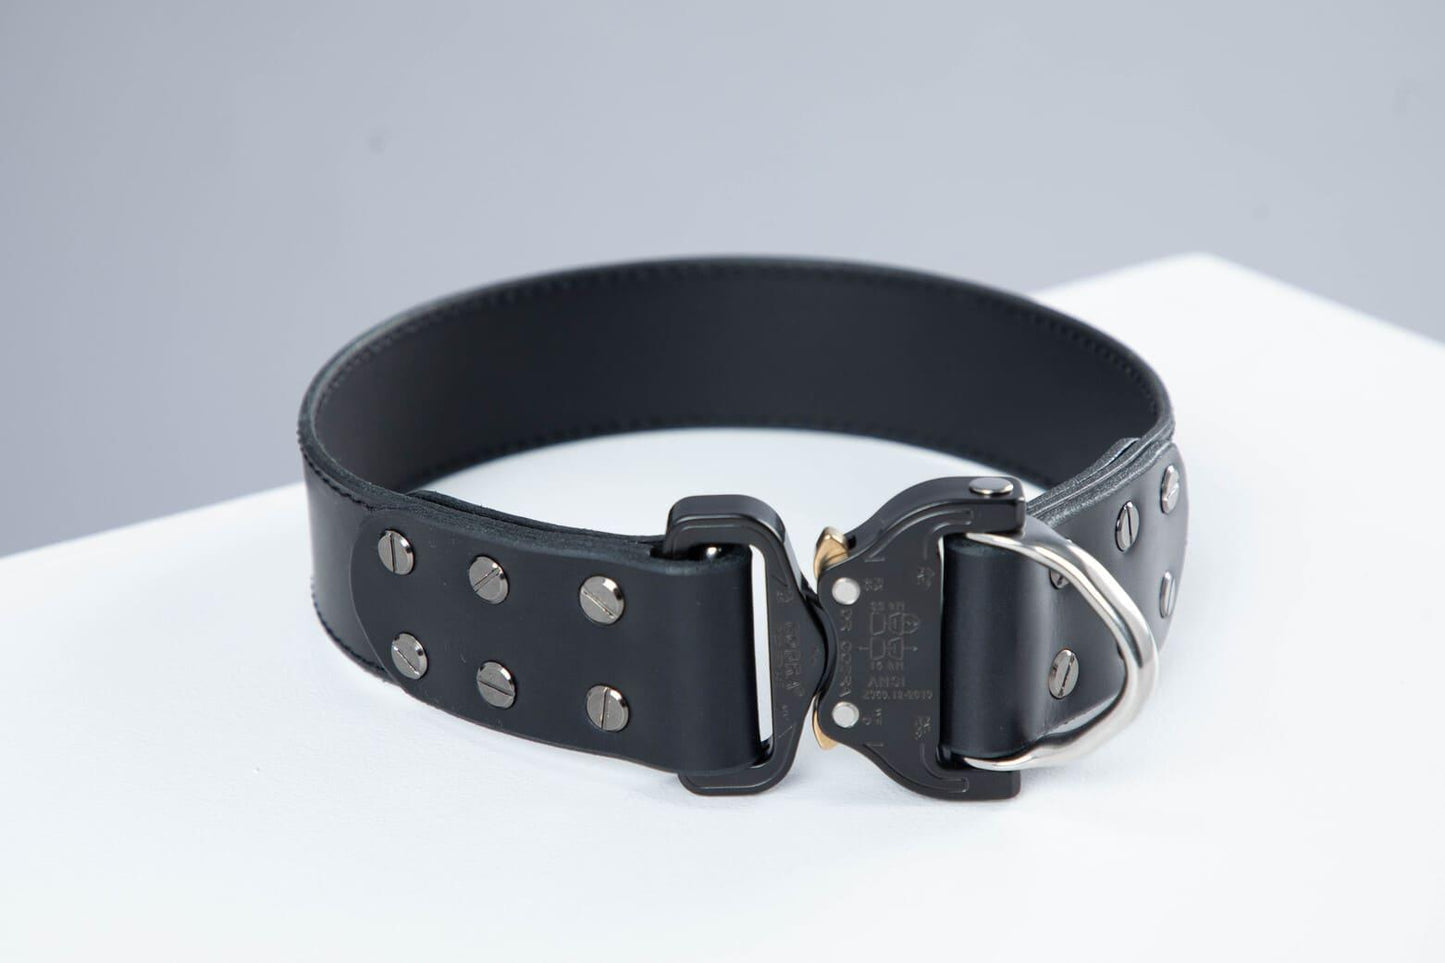 Black leather dog collar with COBRA® buckle - handmade in Lithuania by My Wild Other